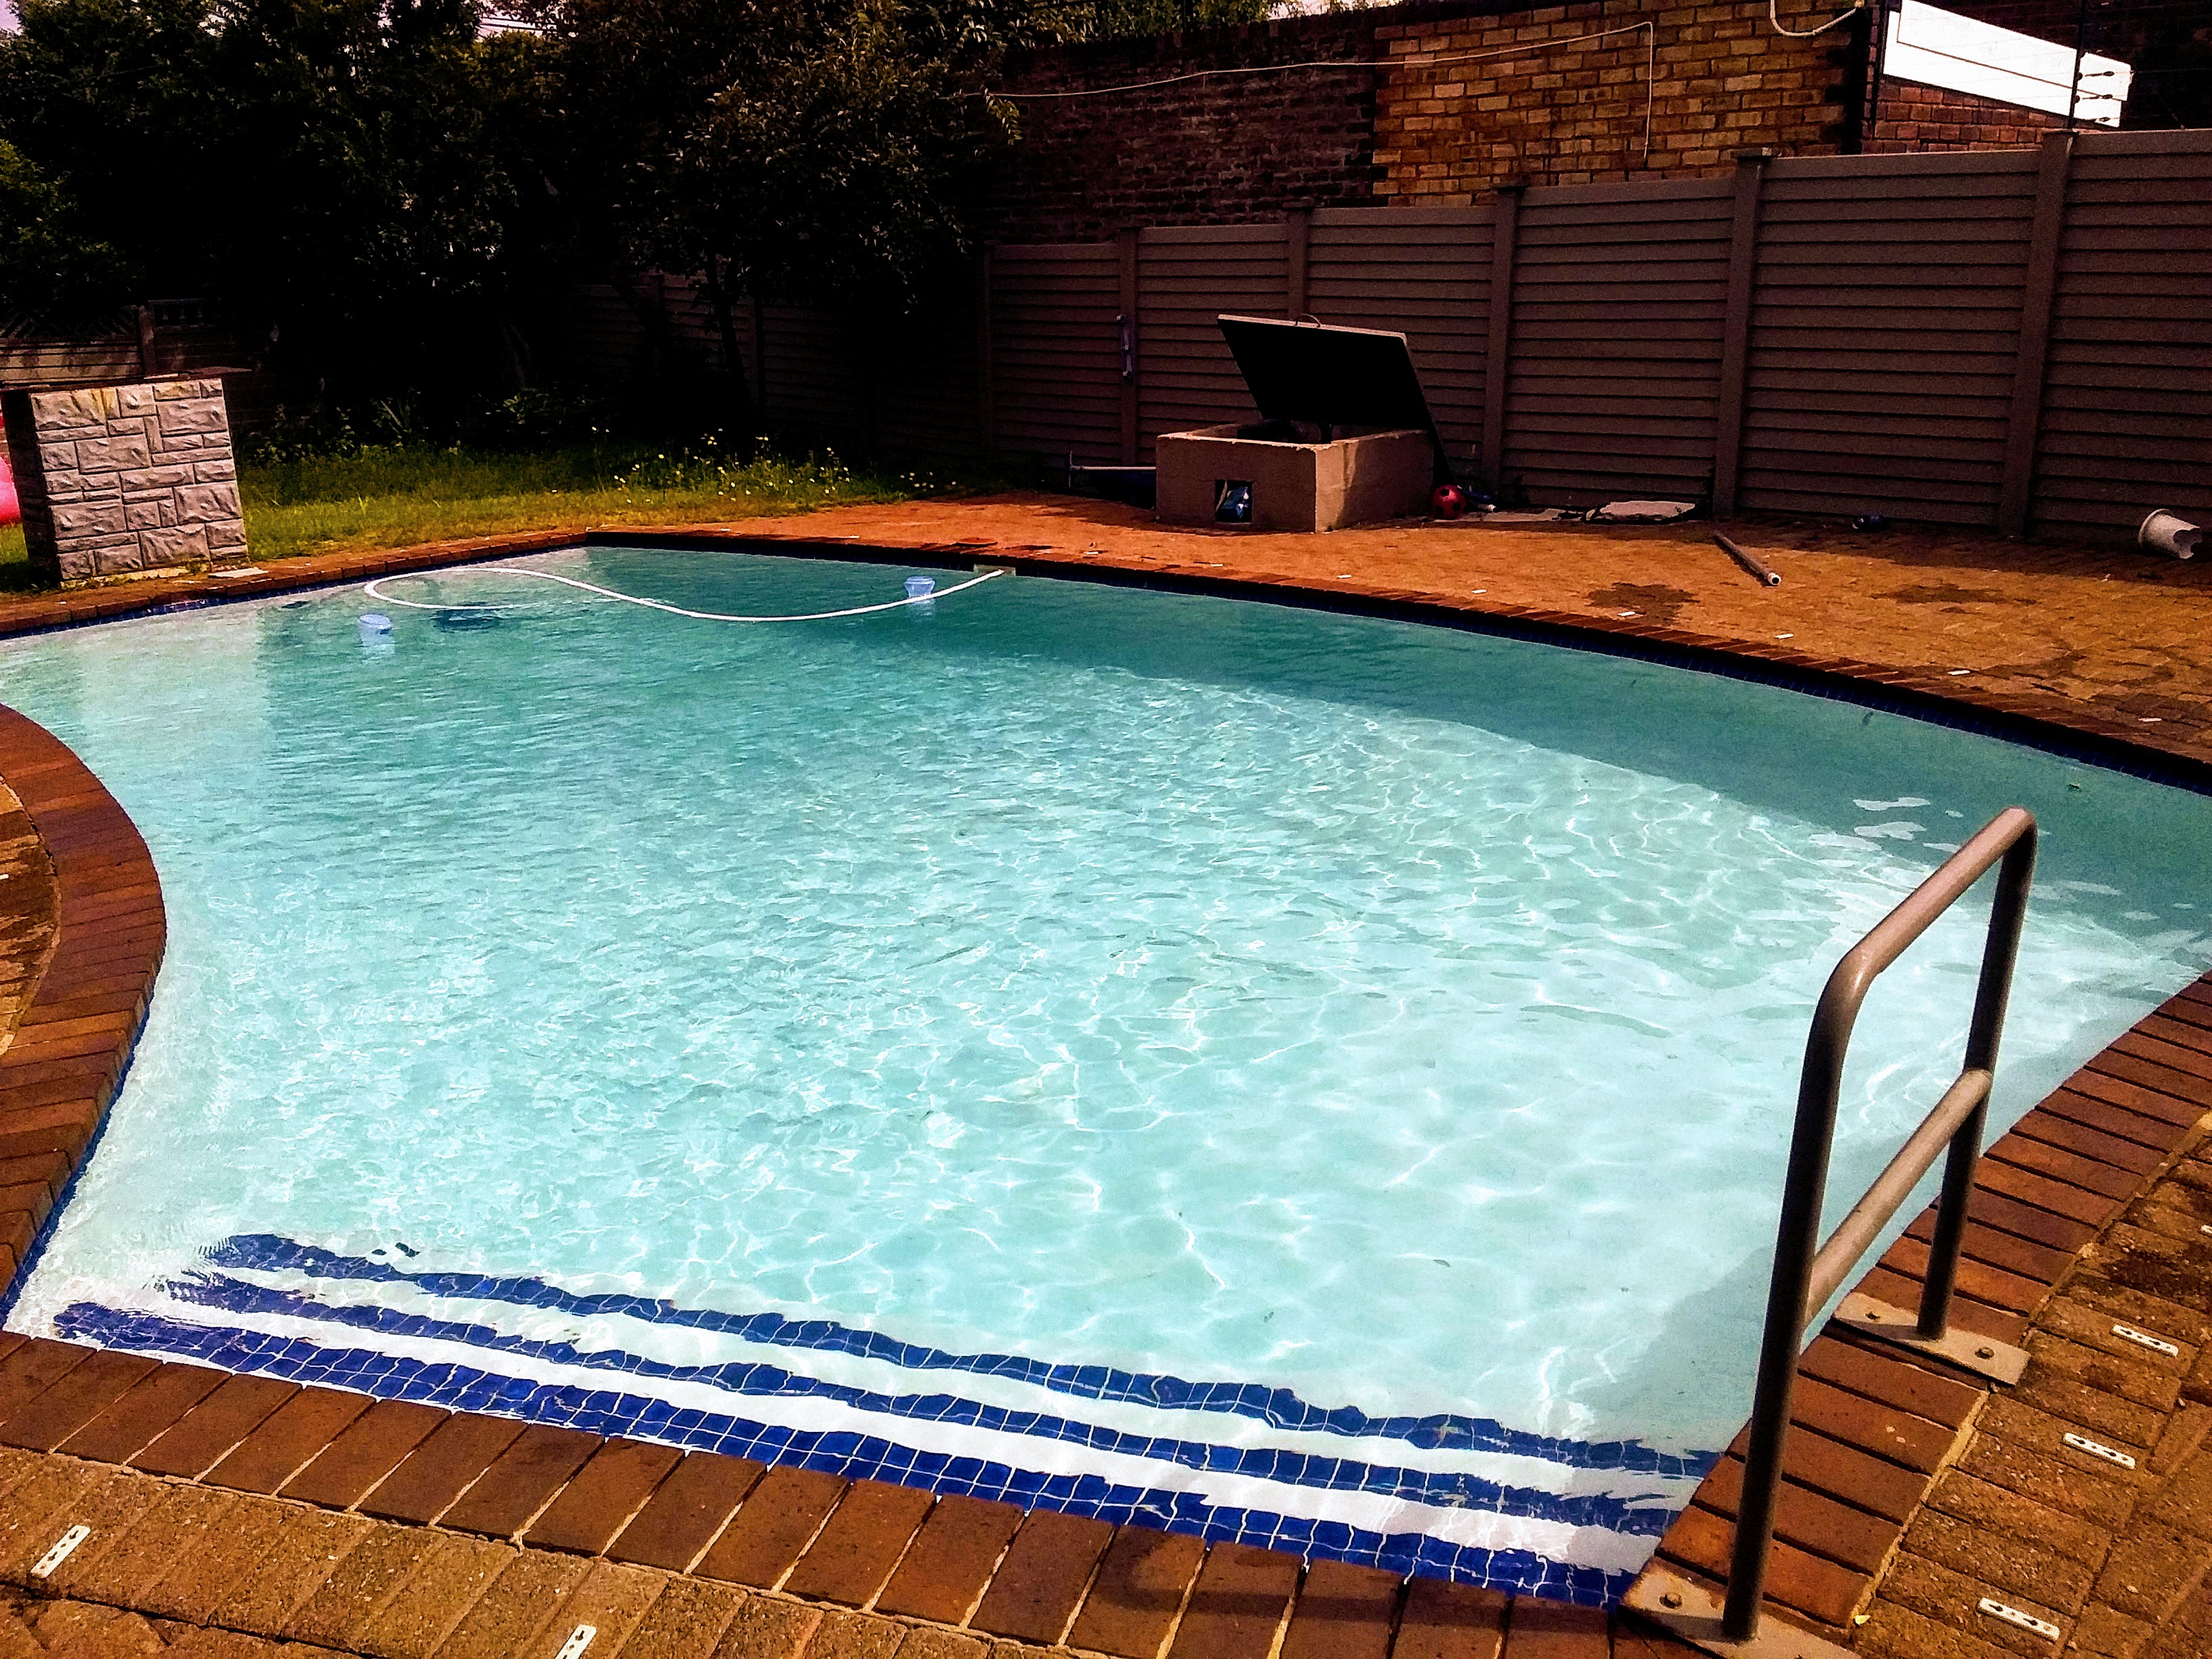 Weekly Pool Maintenance services and packages